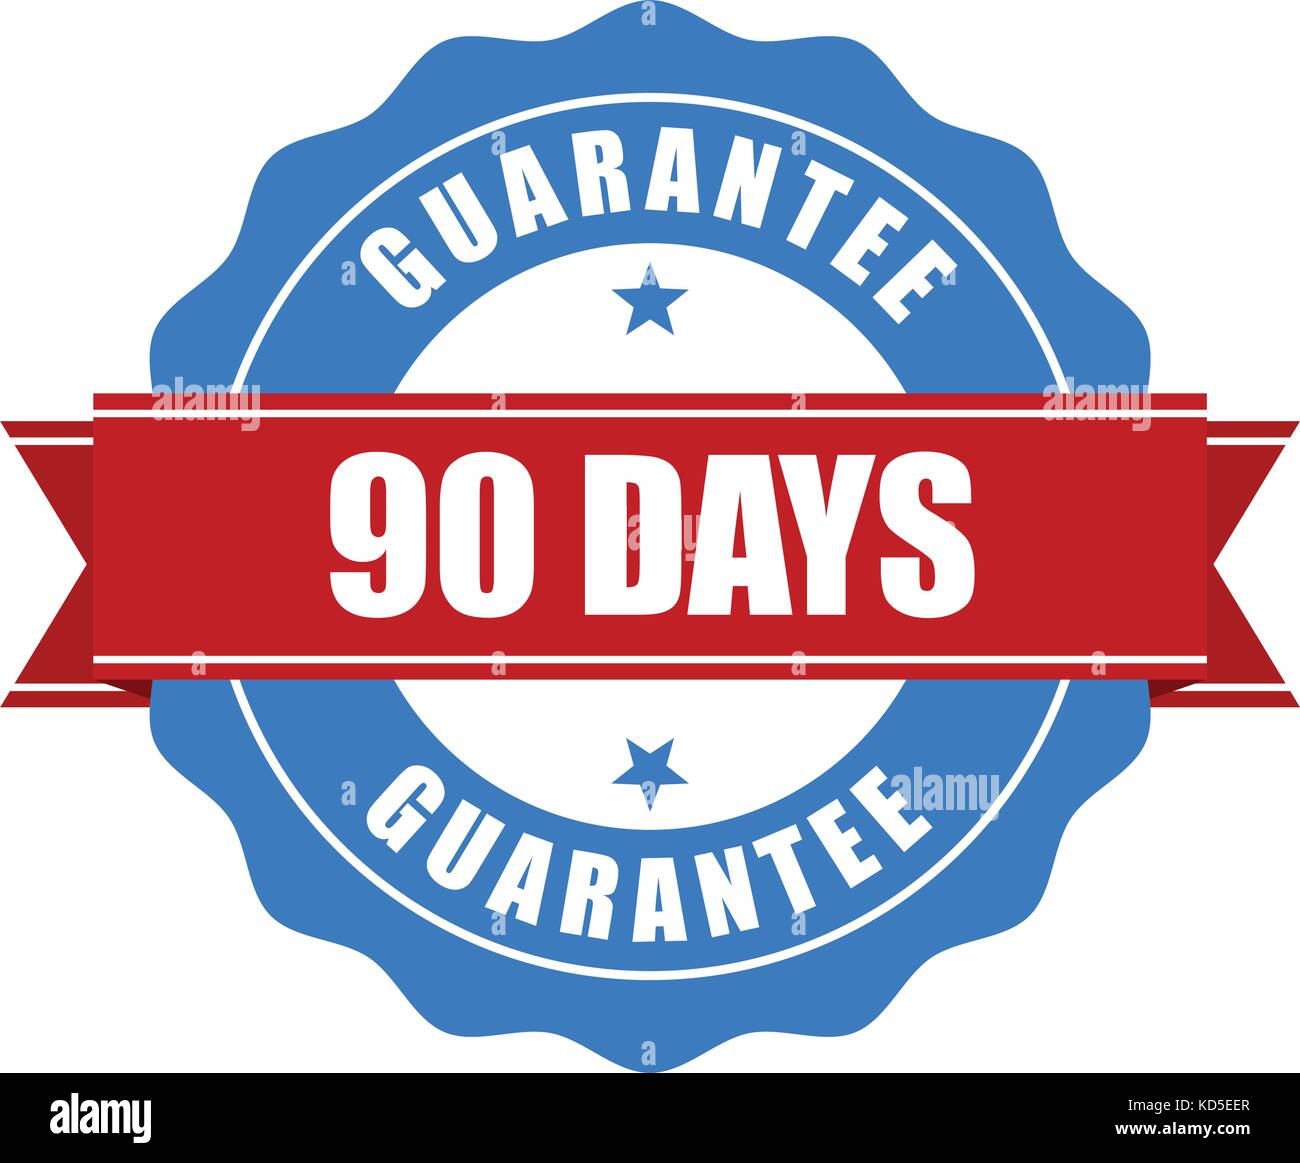 90 days guarantee stamp - warranty sign Stock Vector